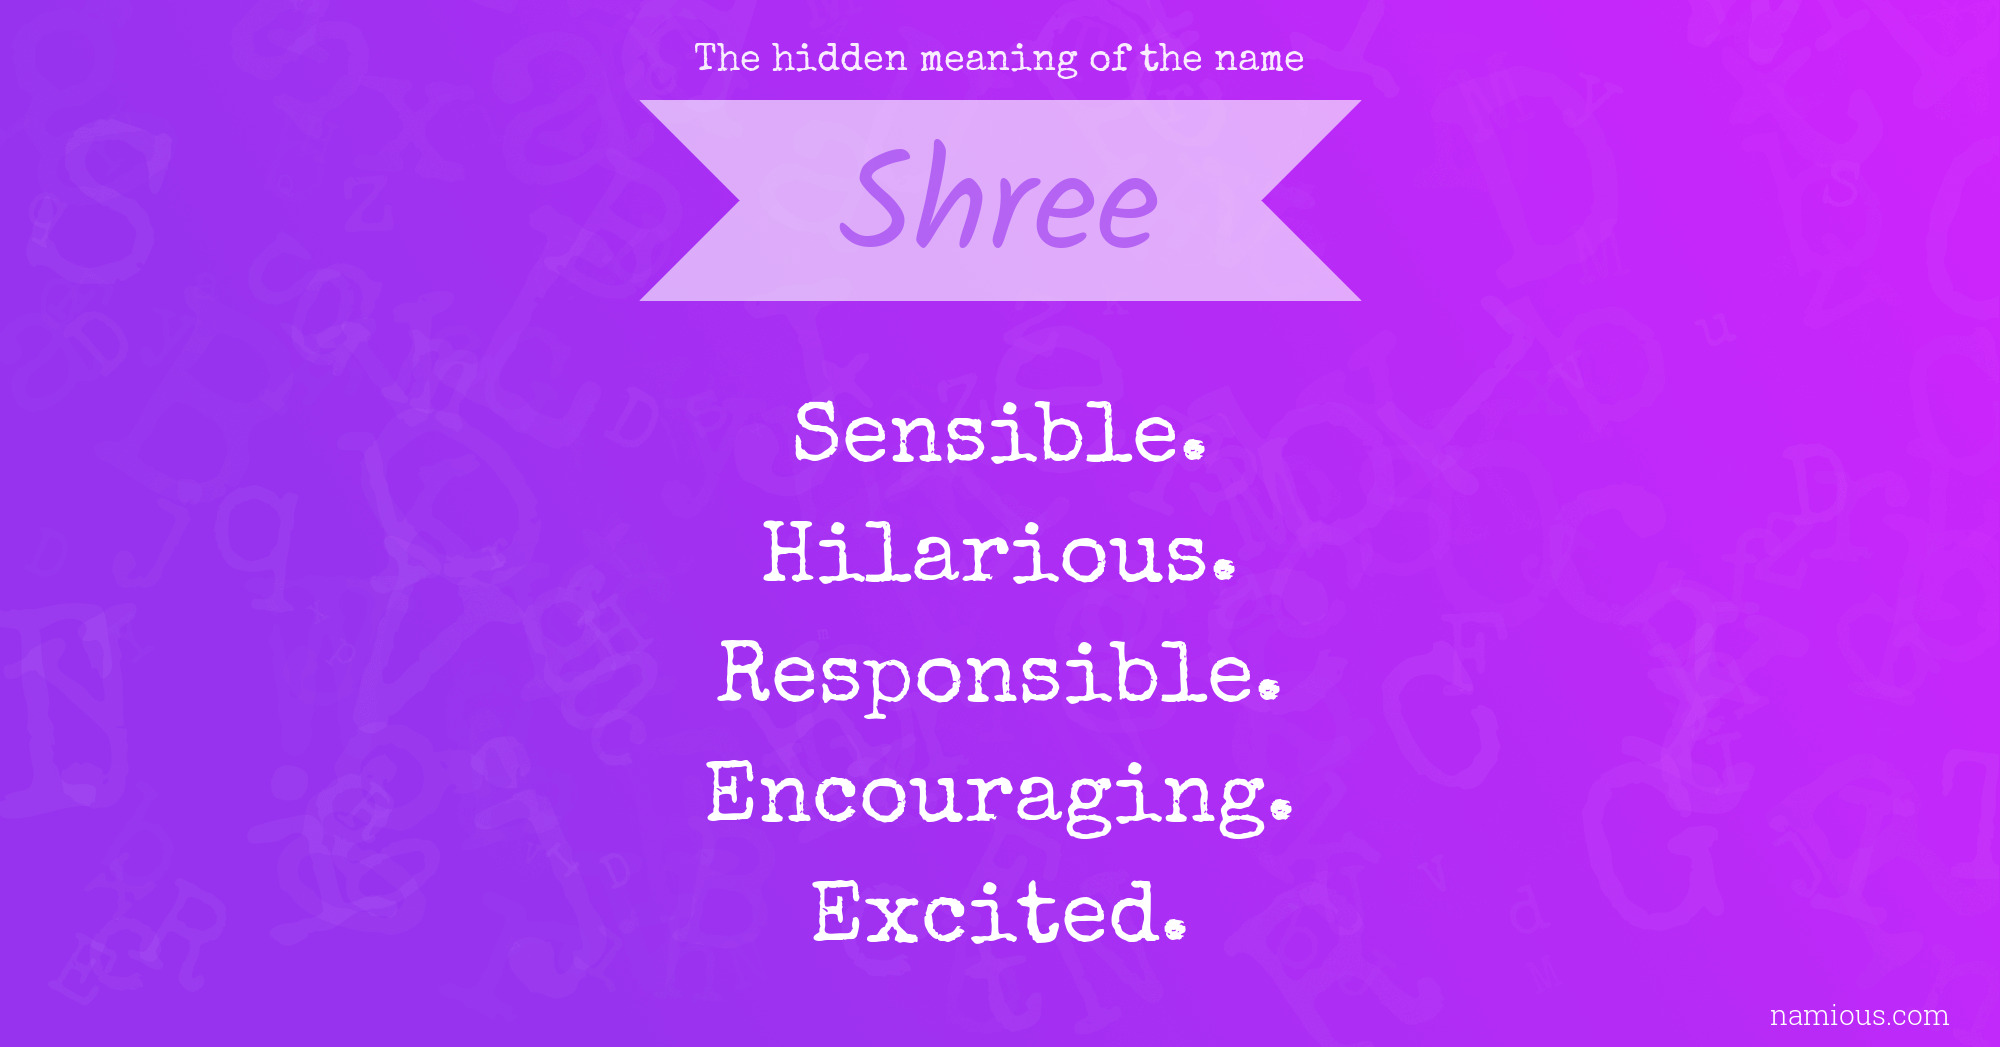 The hidden meaning of the name Shree